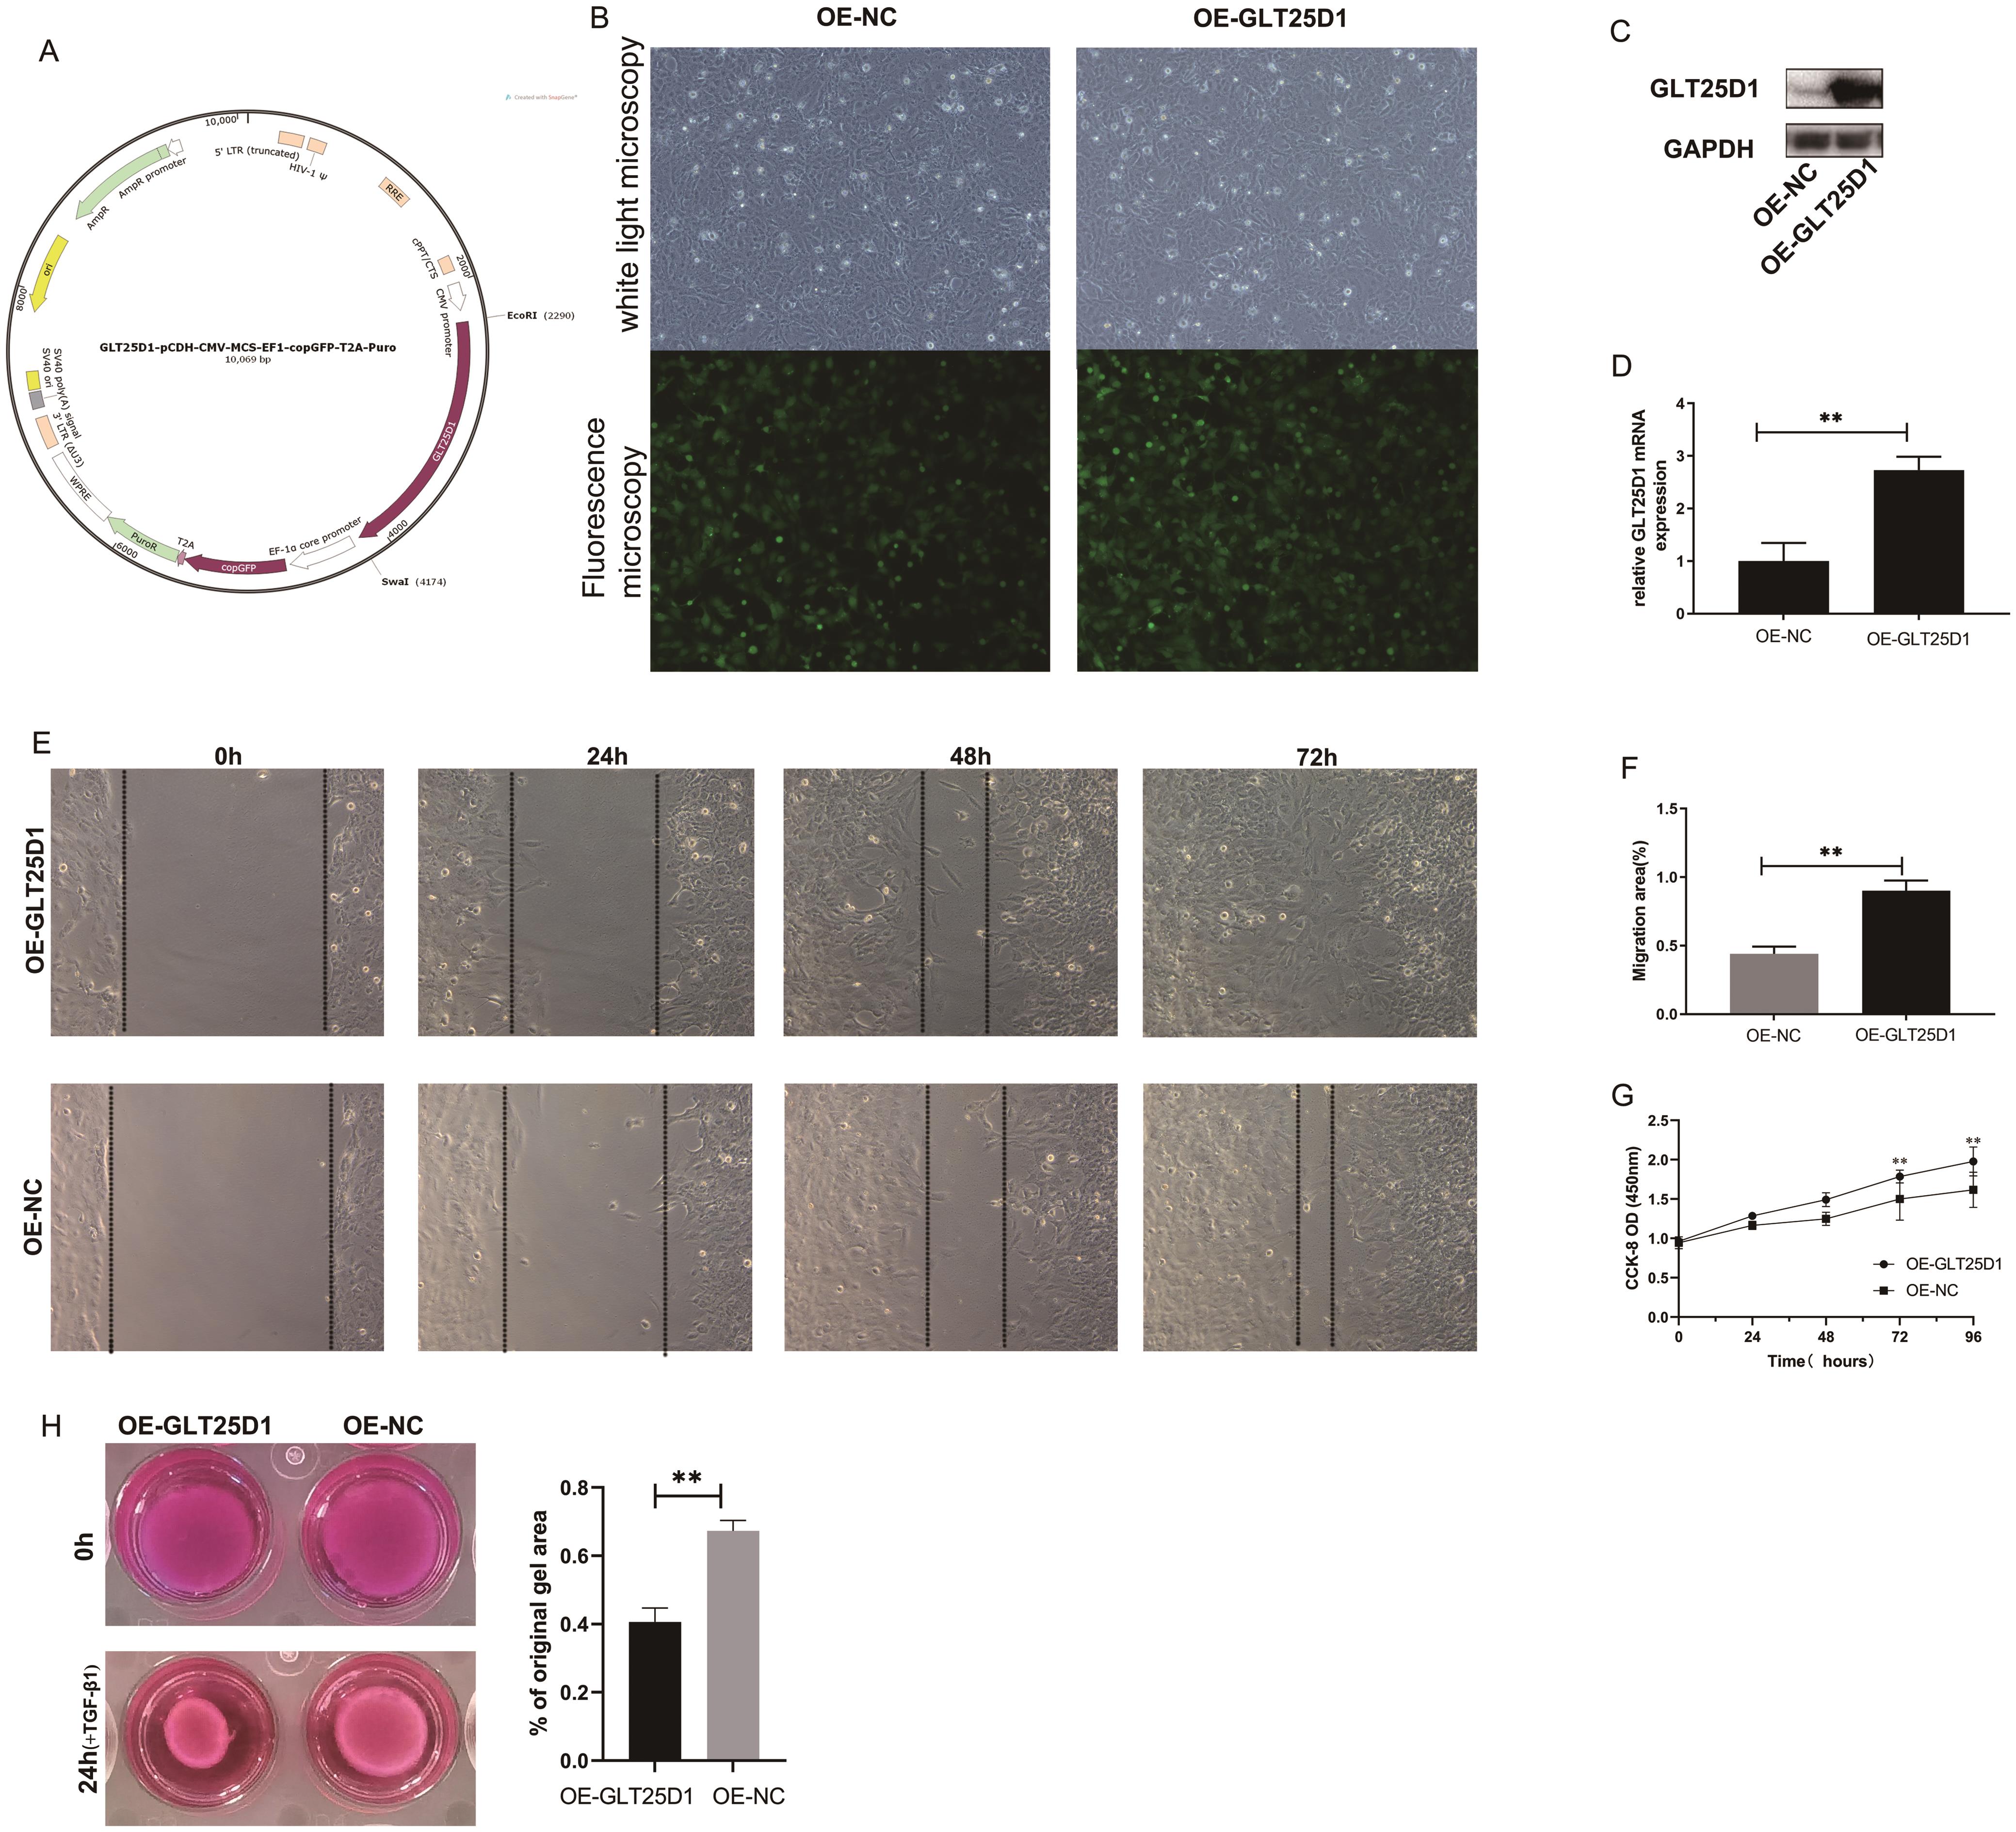 GLT25D1 overexpression activates LX-2 cells and their corresponding phenotypes.